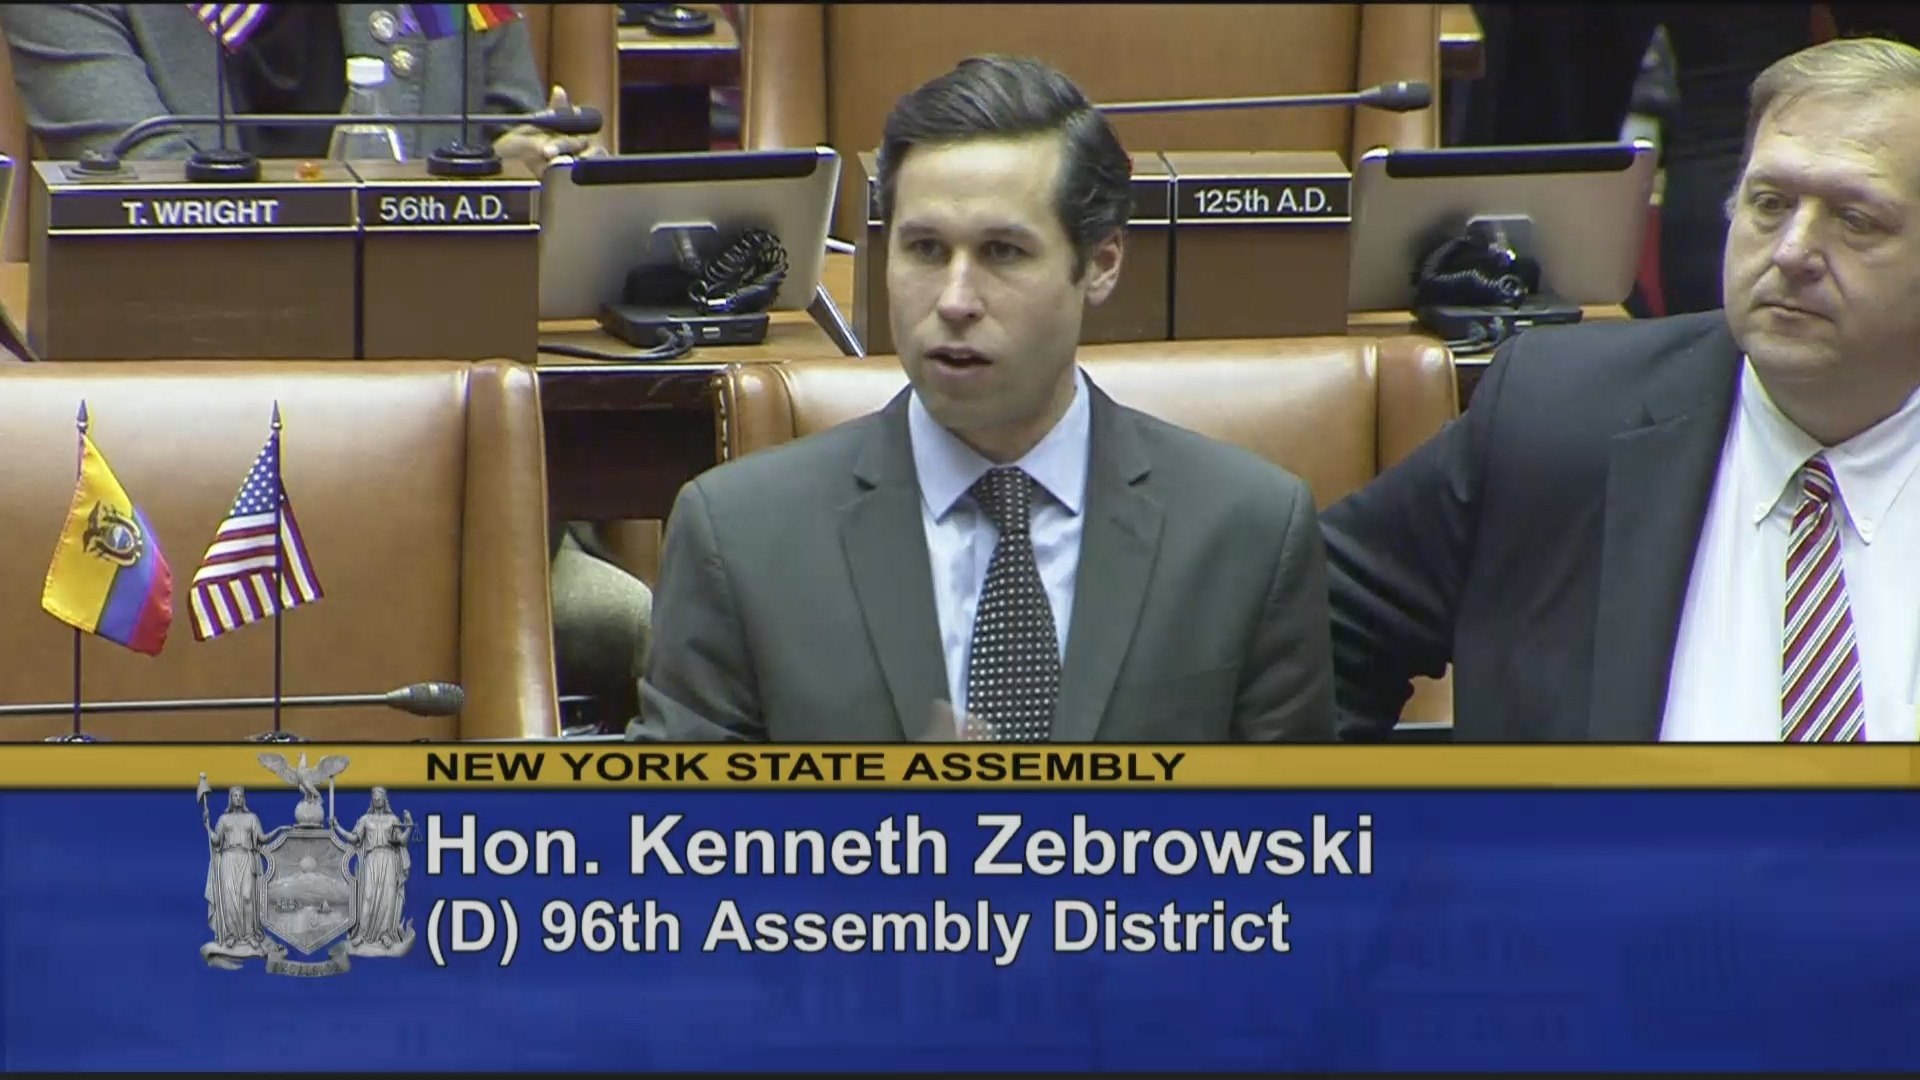 Welcoming Clarkstown Town Supervisor Hoehmann to the Assembly